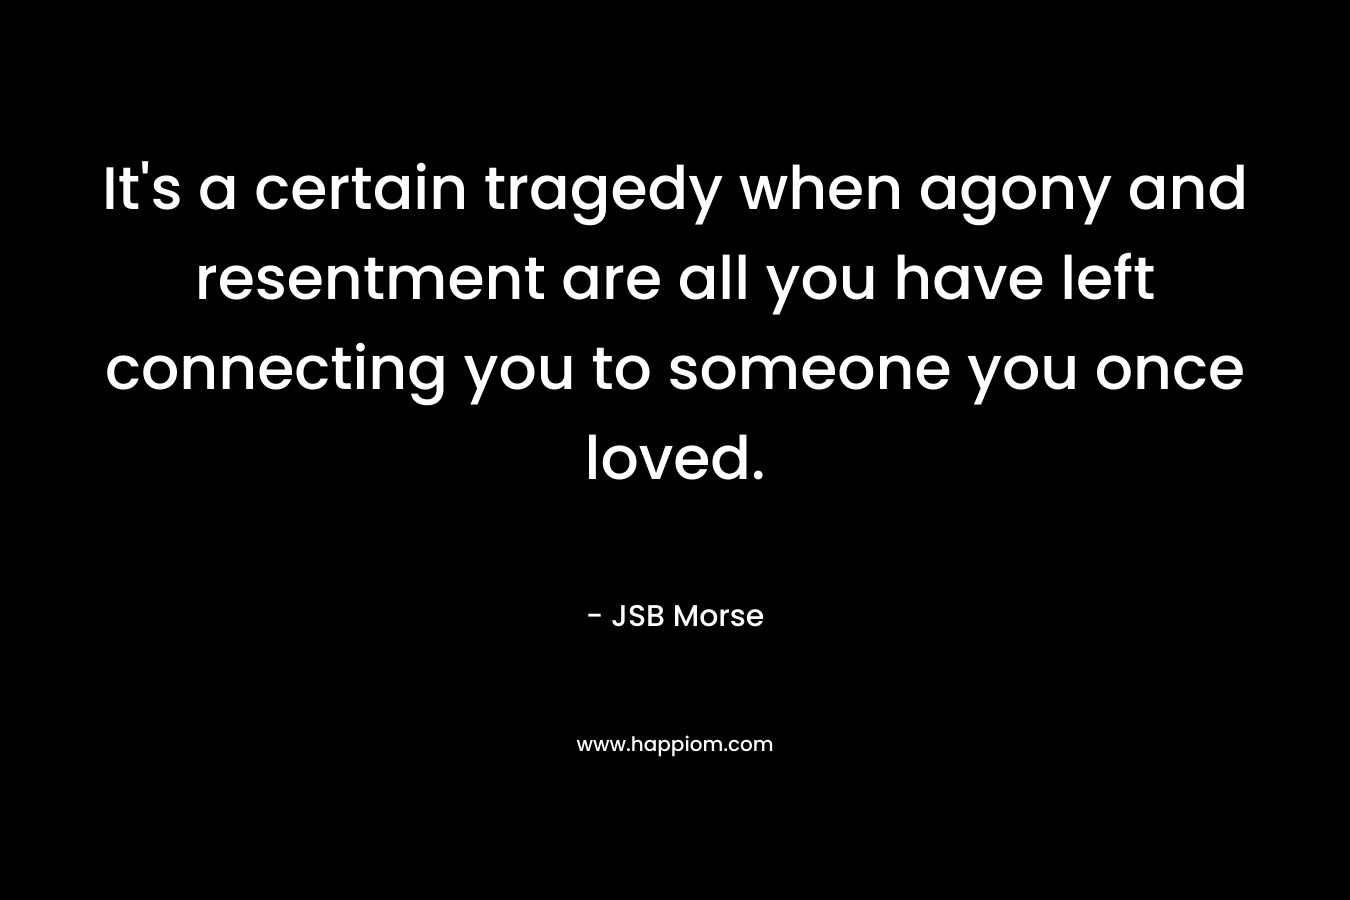 It's a certain tragedy when agony and resentment are all you have left connecting you to someone you once loved.